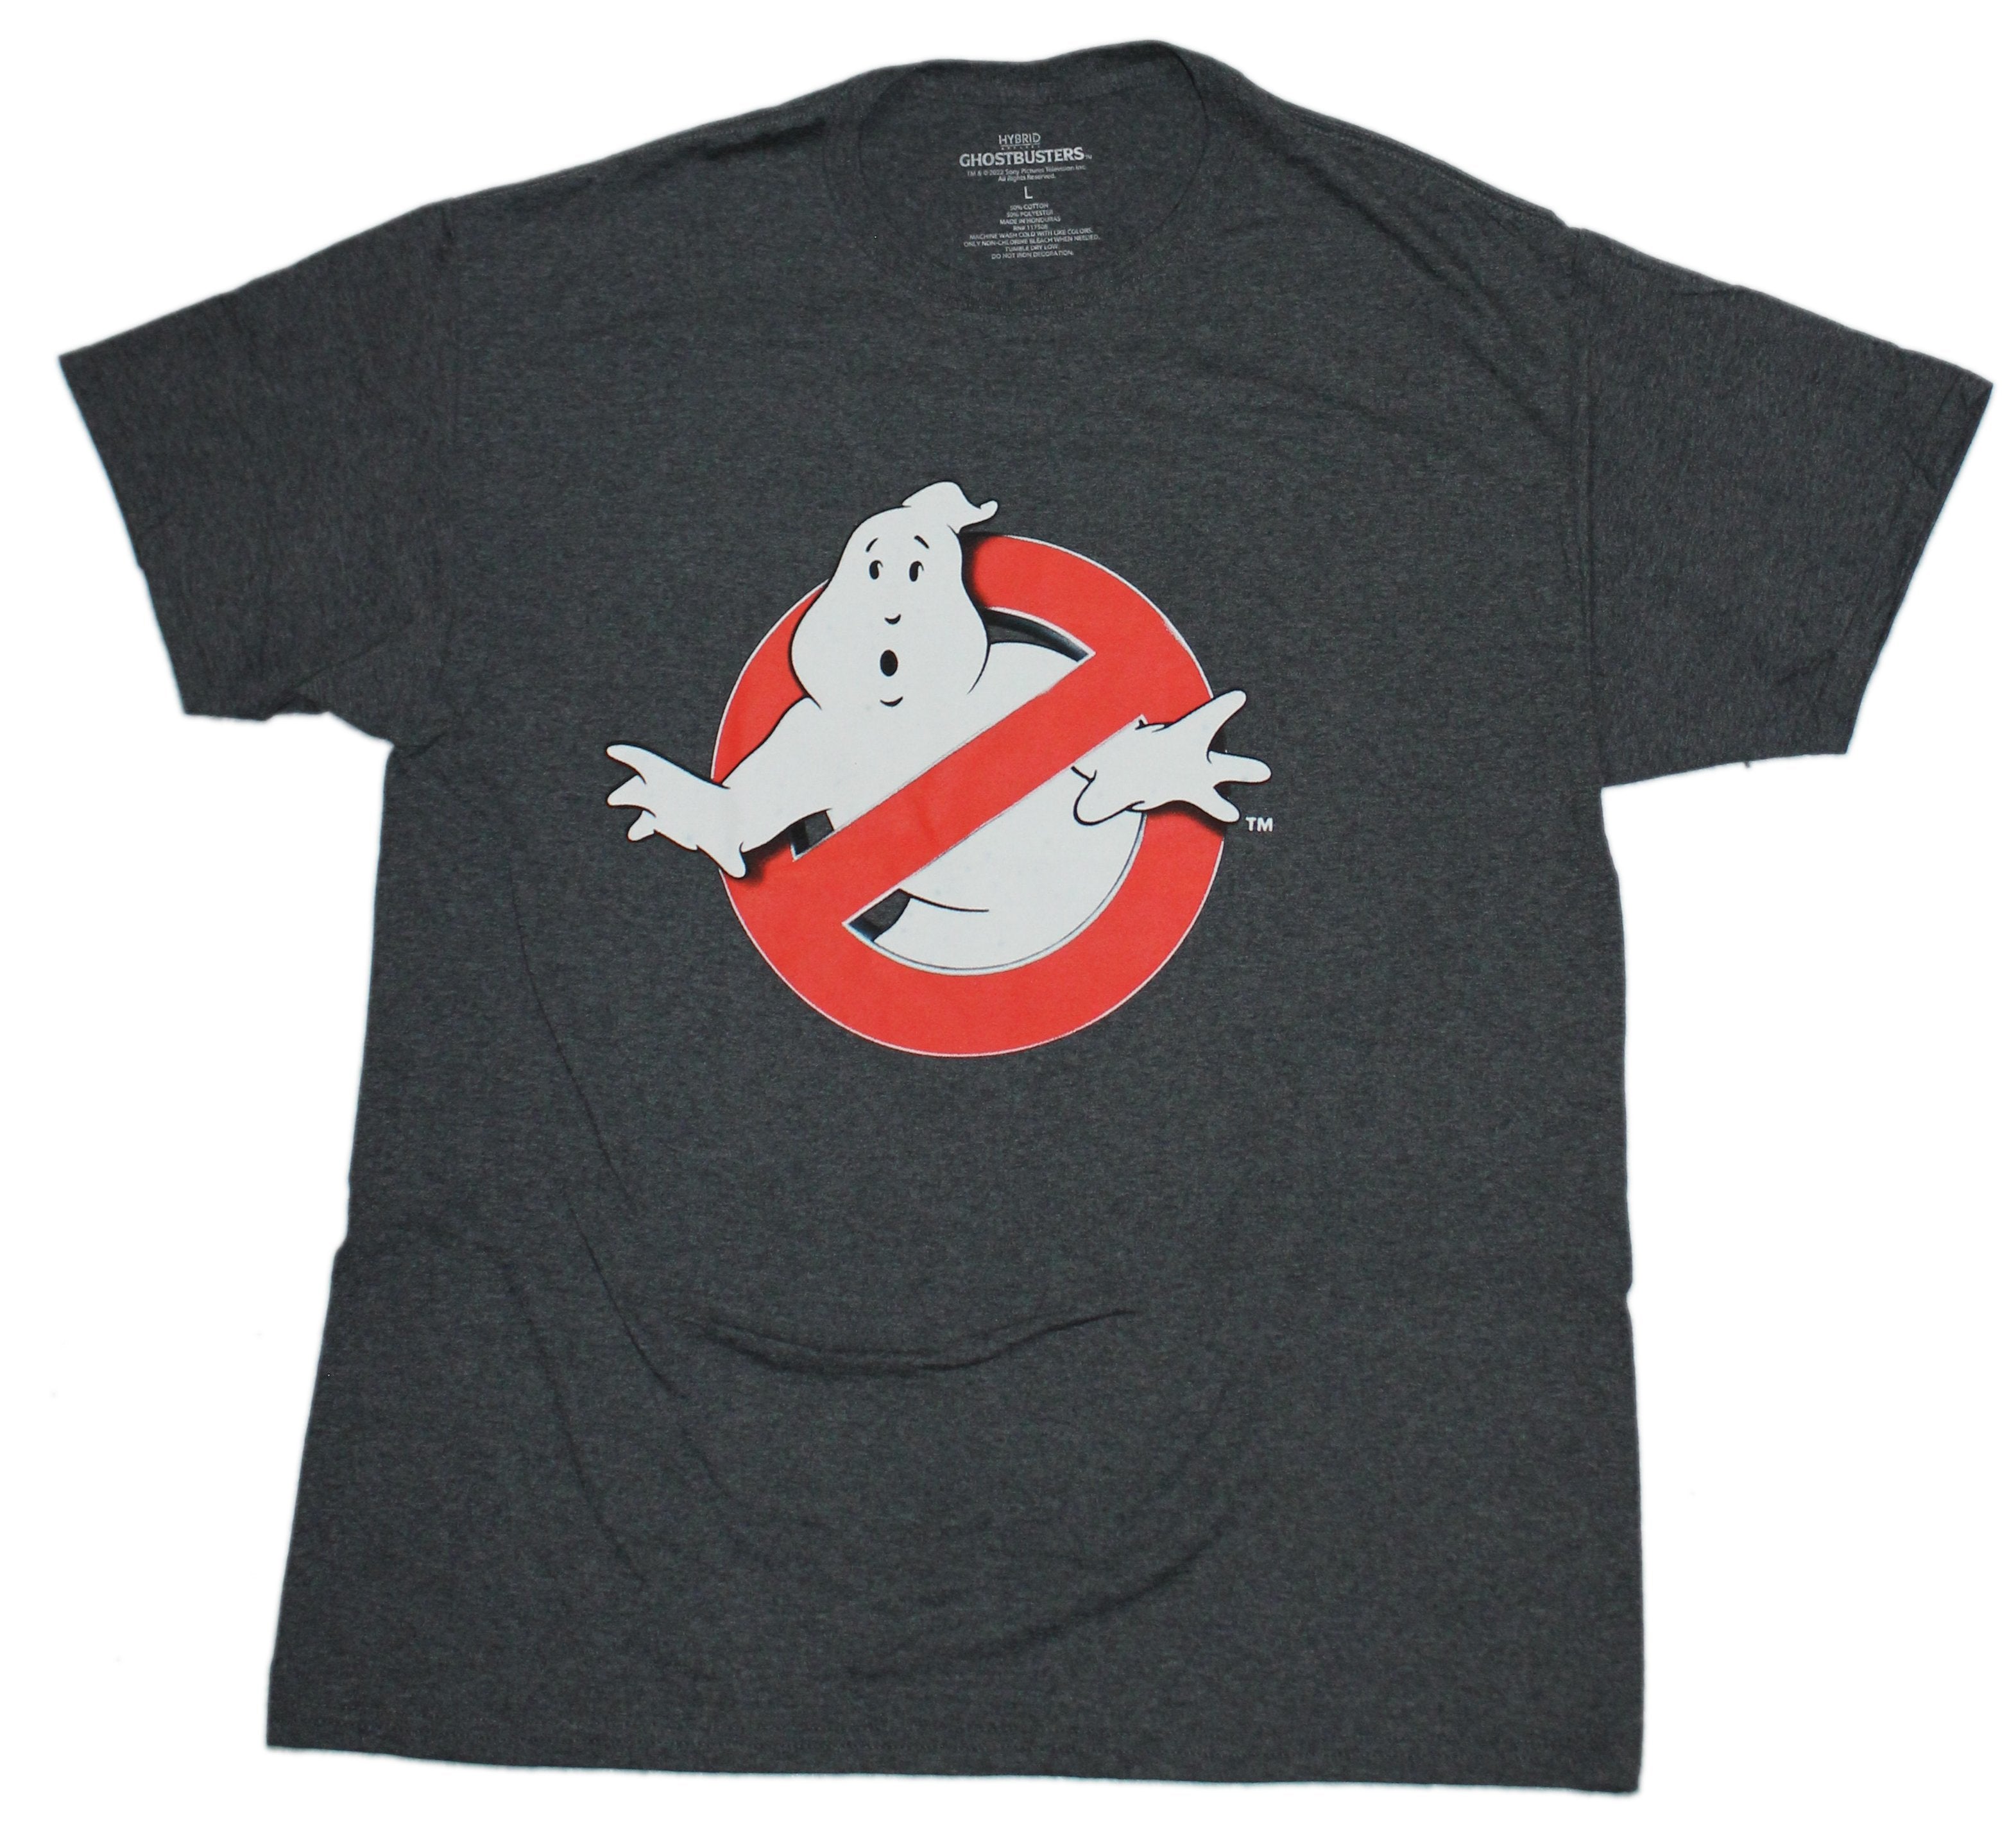 Ghostbusters Mens T-Shirt - Classic No Ghosts Logo